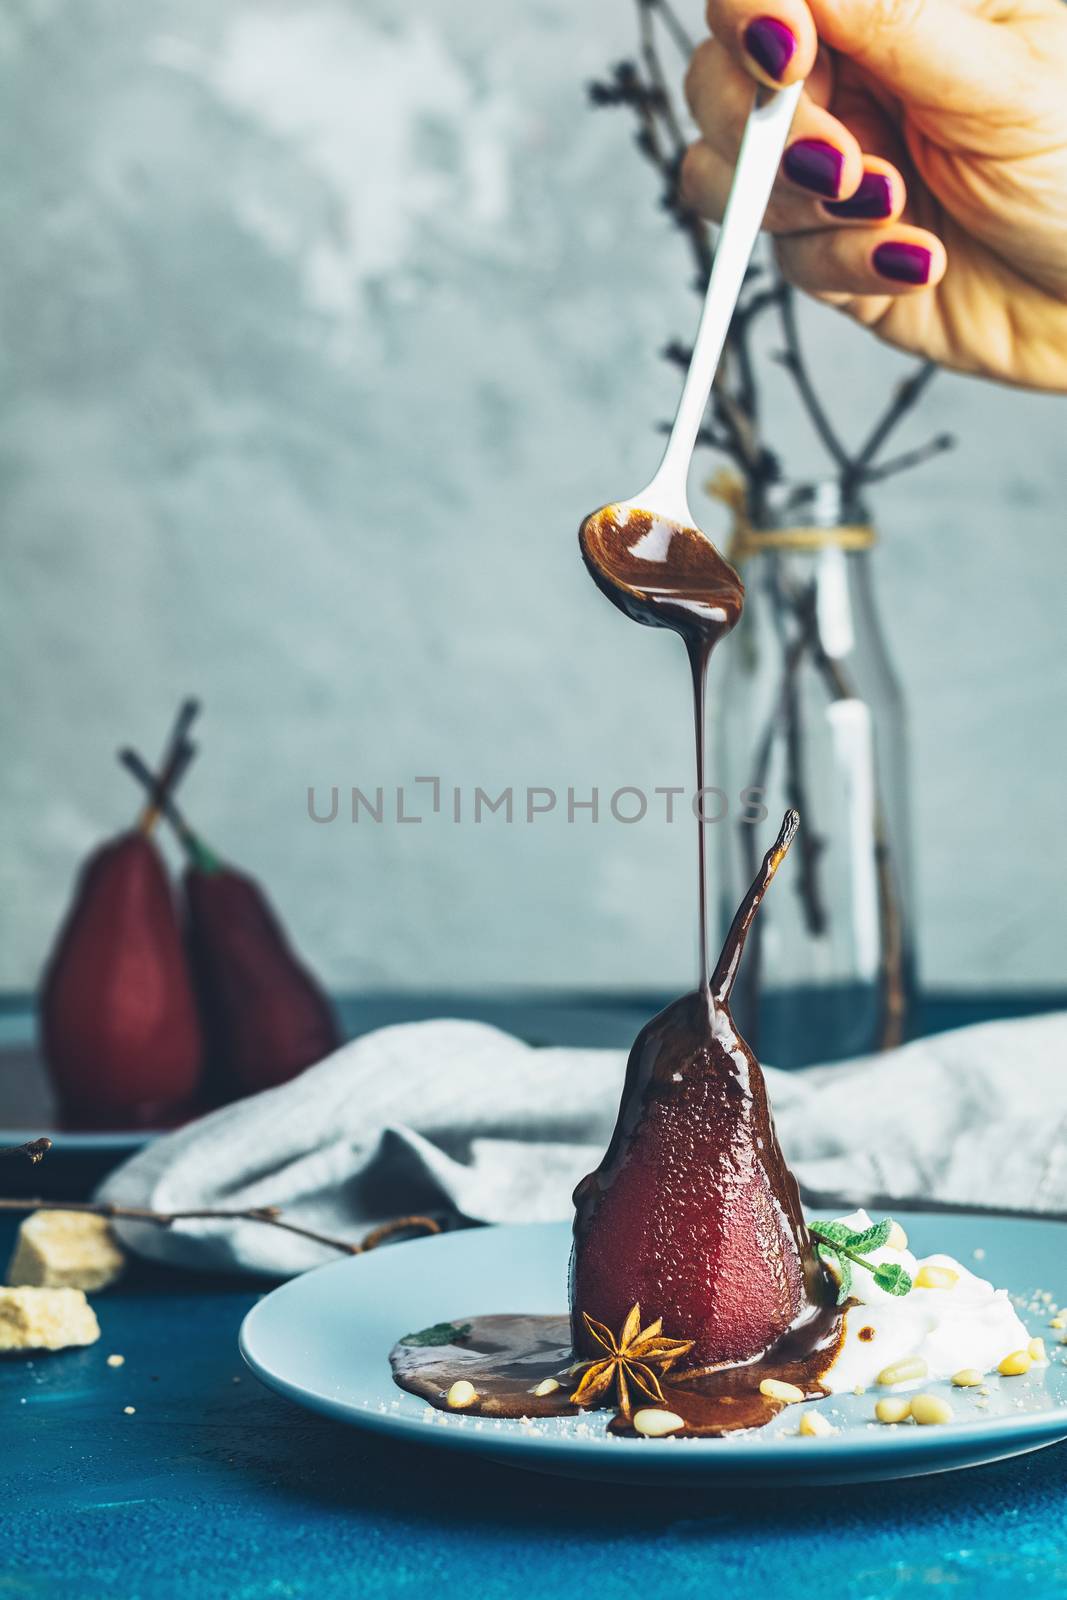 Chocolate sauce pours from a spoon on red pears in wine by ArtSvitlyna